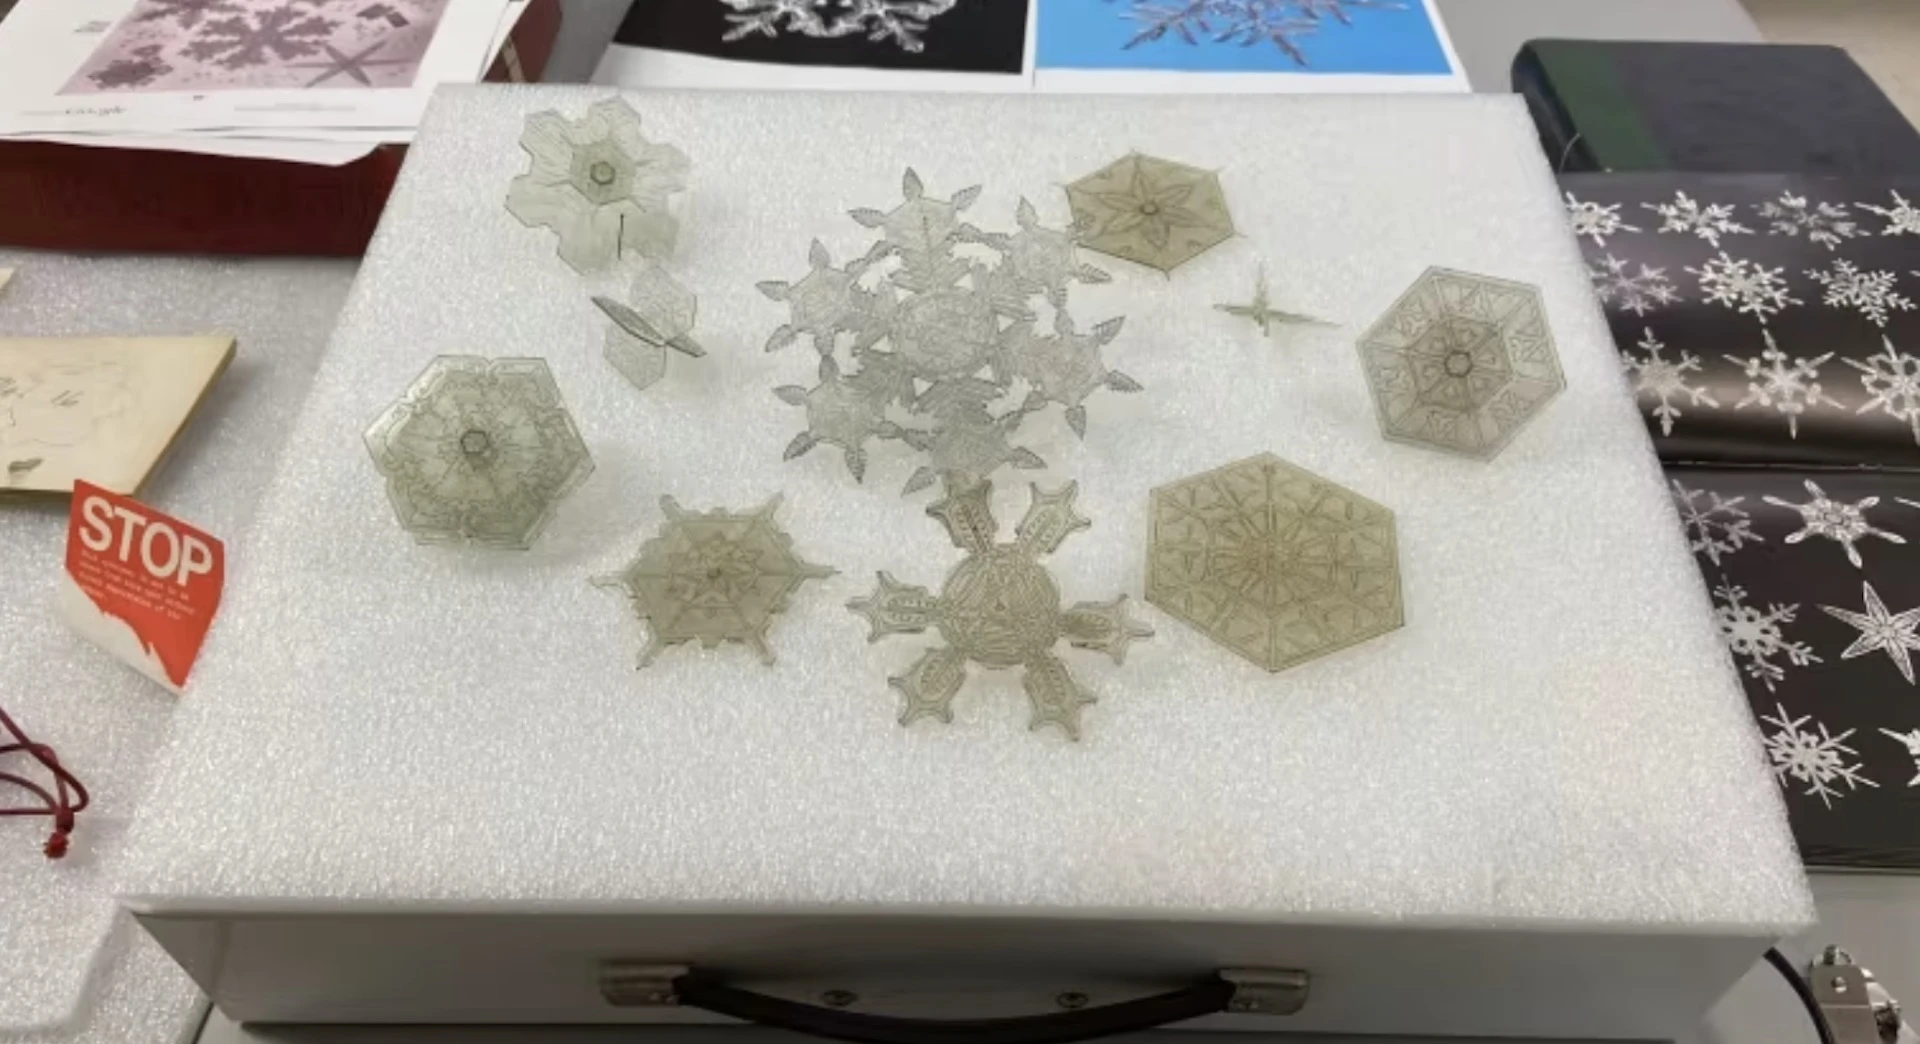 Scientifically accurate snowflake models discovered likely first of their kind